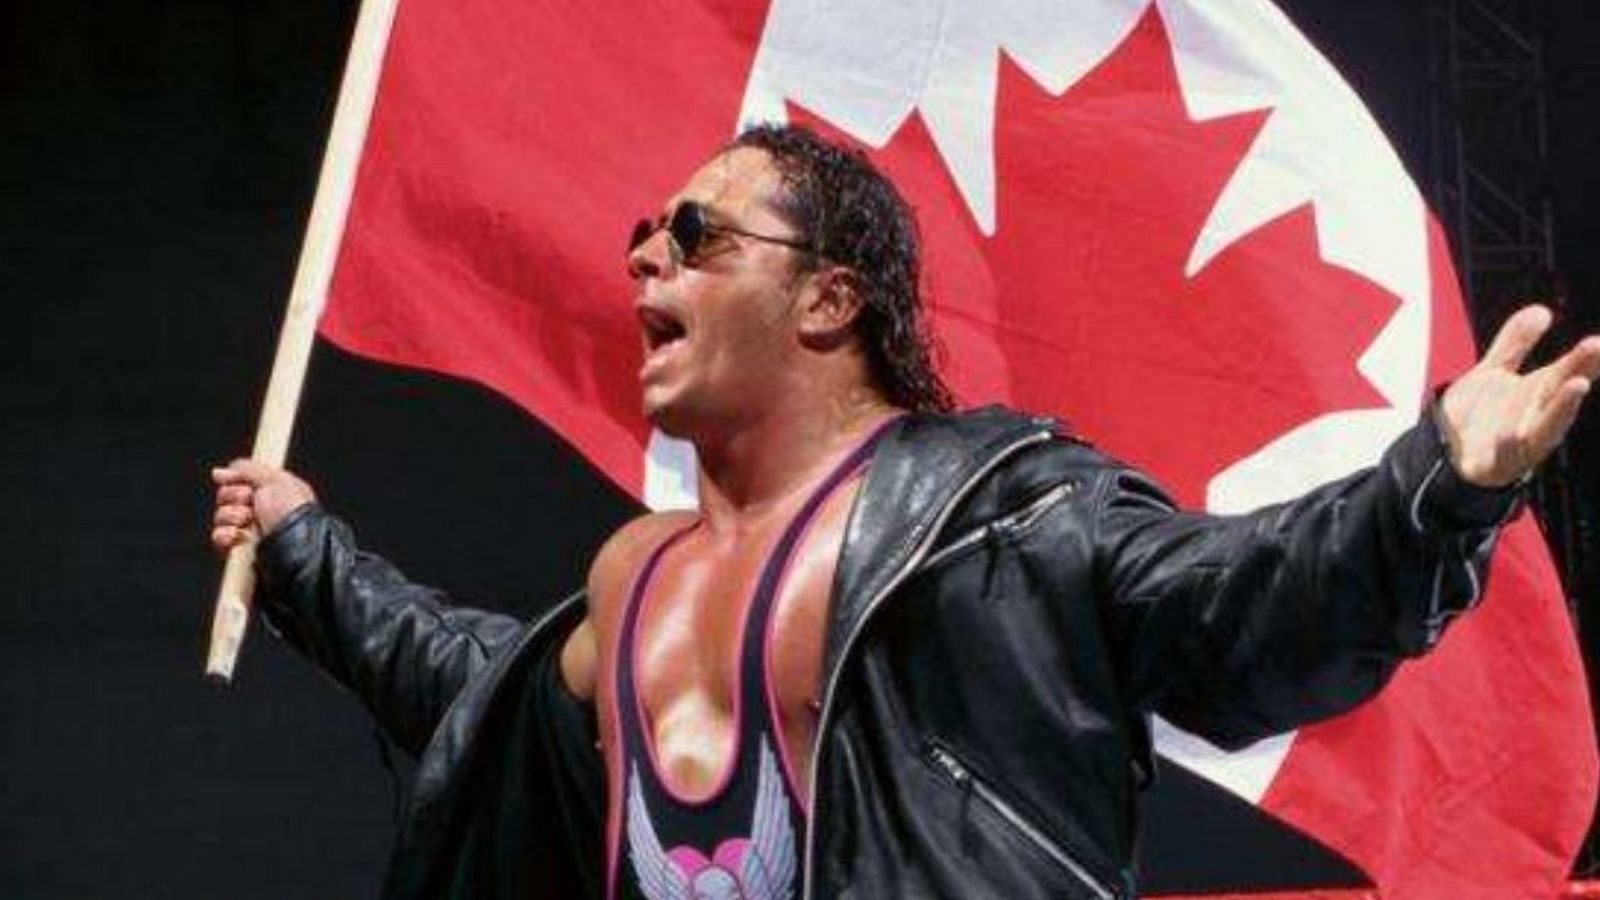 Bret Hart was one of the biggest names in wrestling during the mid-late 90s.